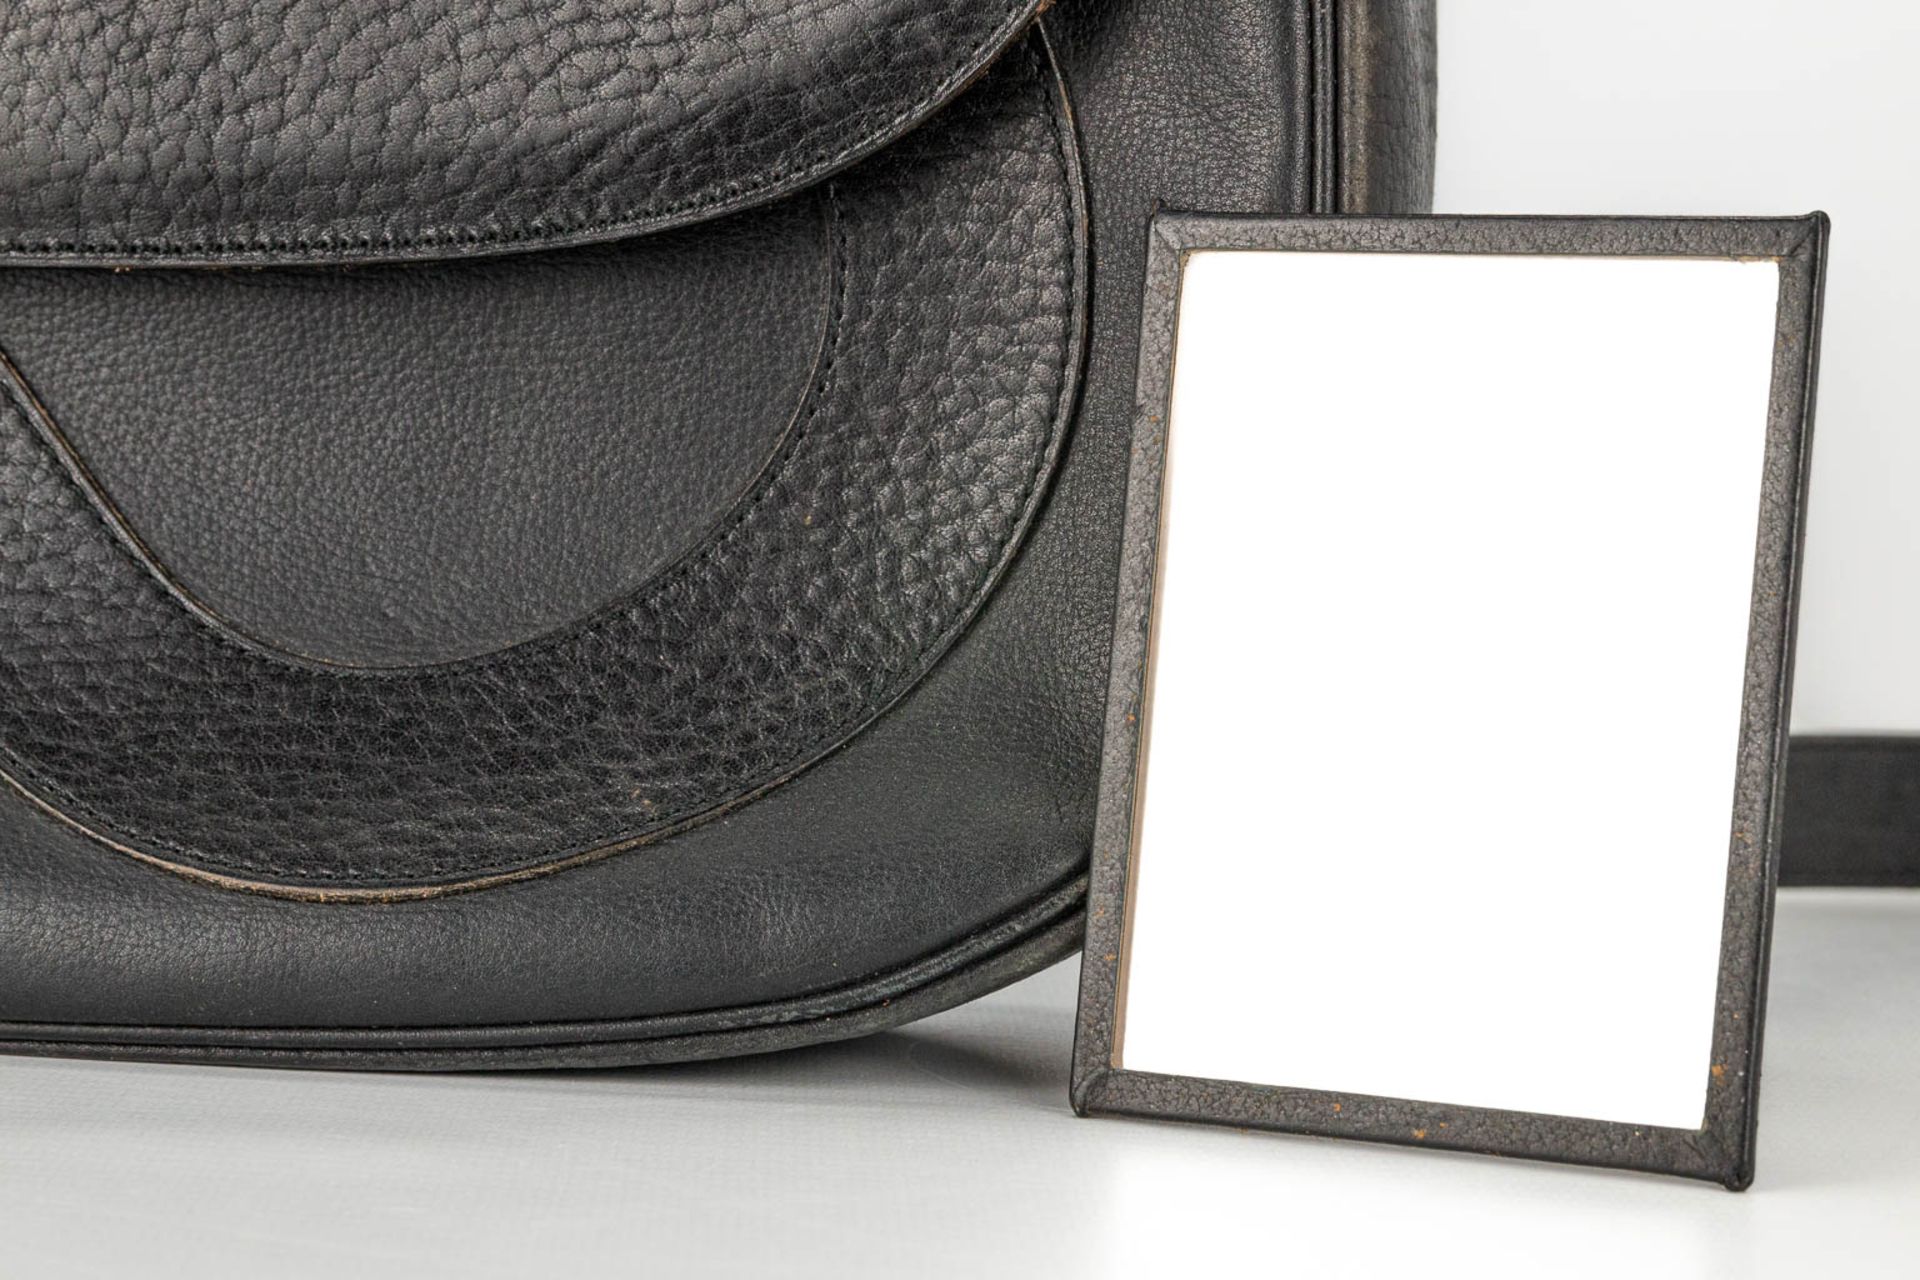 A purse made of black leather and marked Delvaux, with the original mirror. - Image 11 of 15